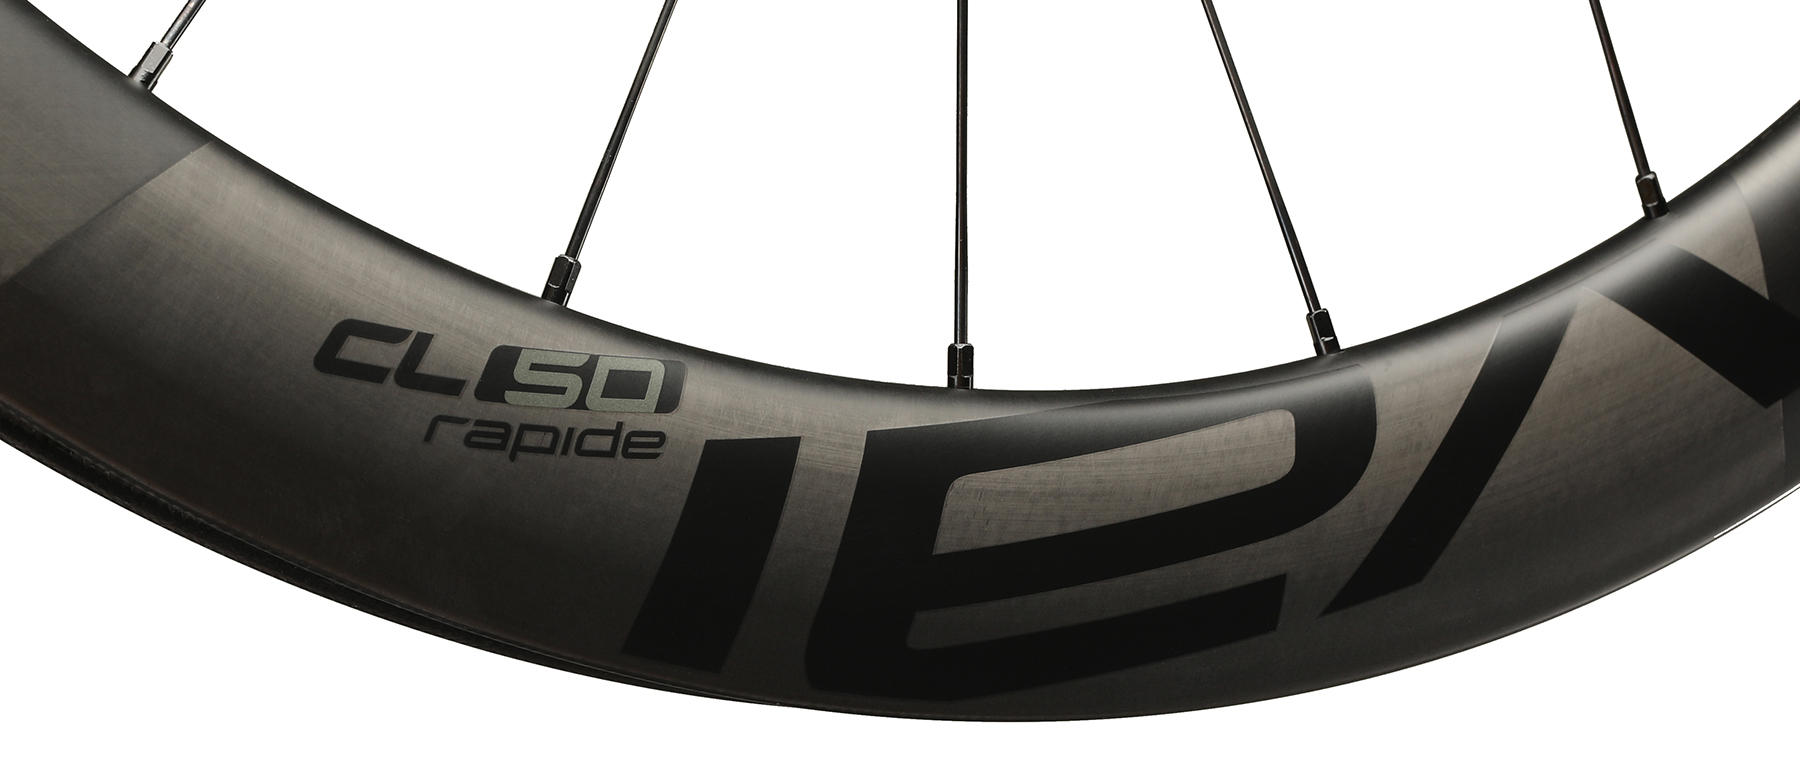 Roval Rapide CL 50 Disc Wheelset Excel Sports | Shop Online From 